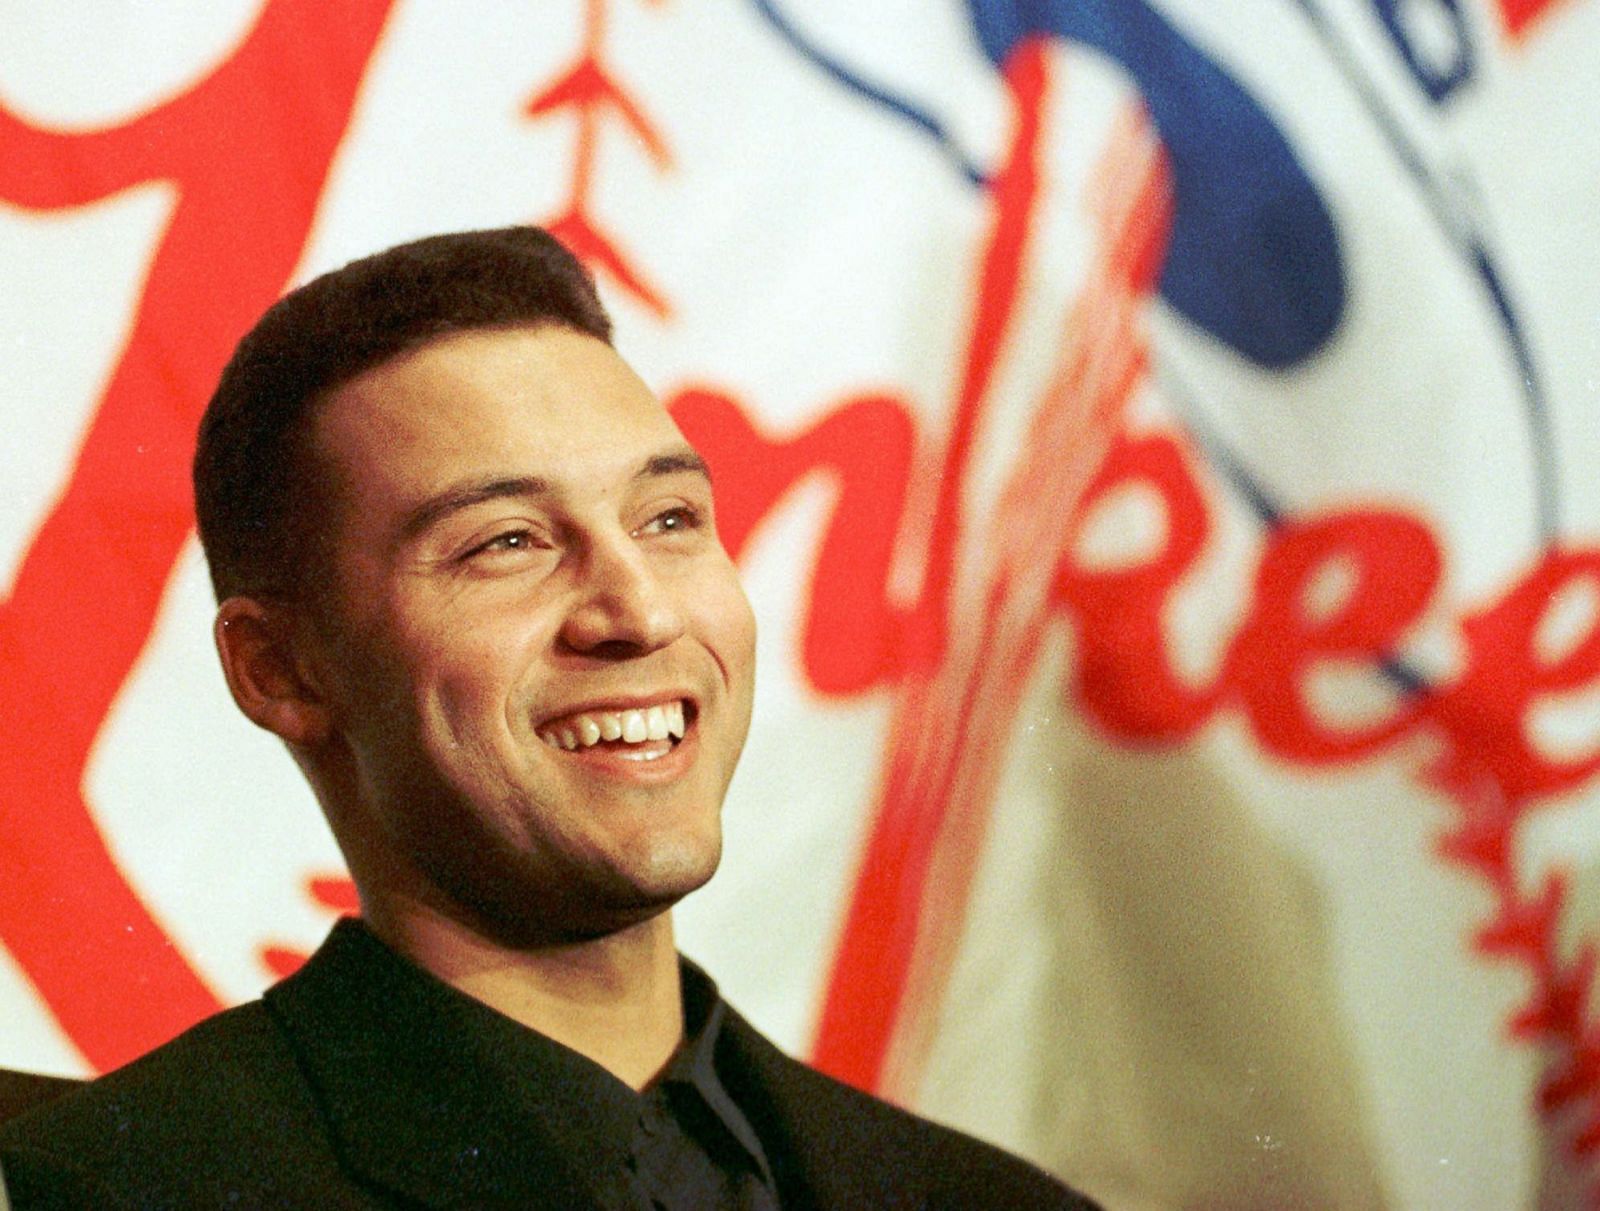 When Derek Jeter reflected on his iconic hairstyles over the years